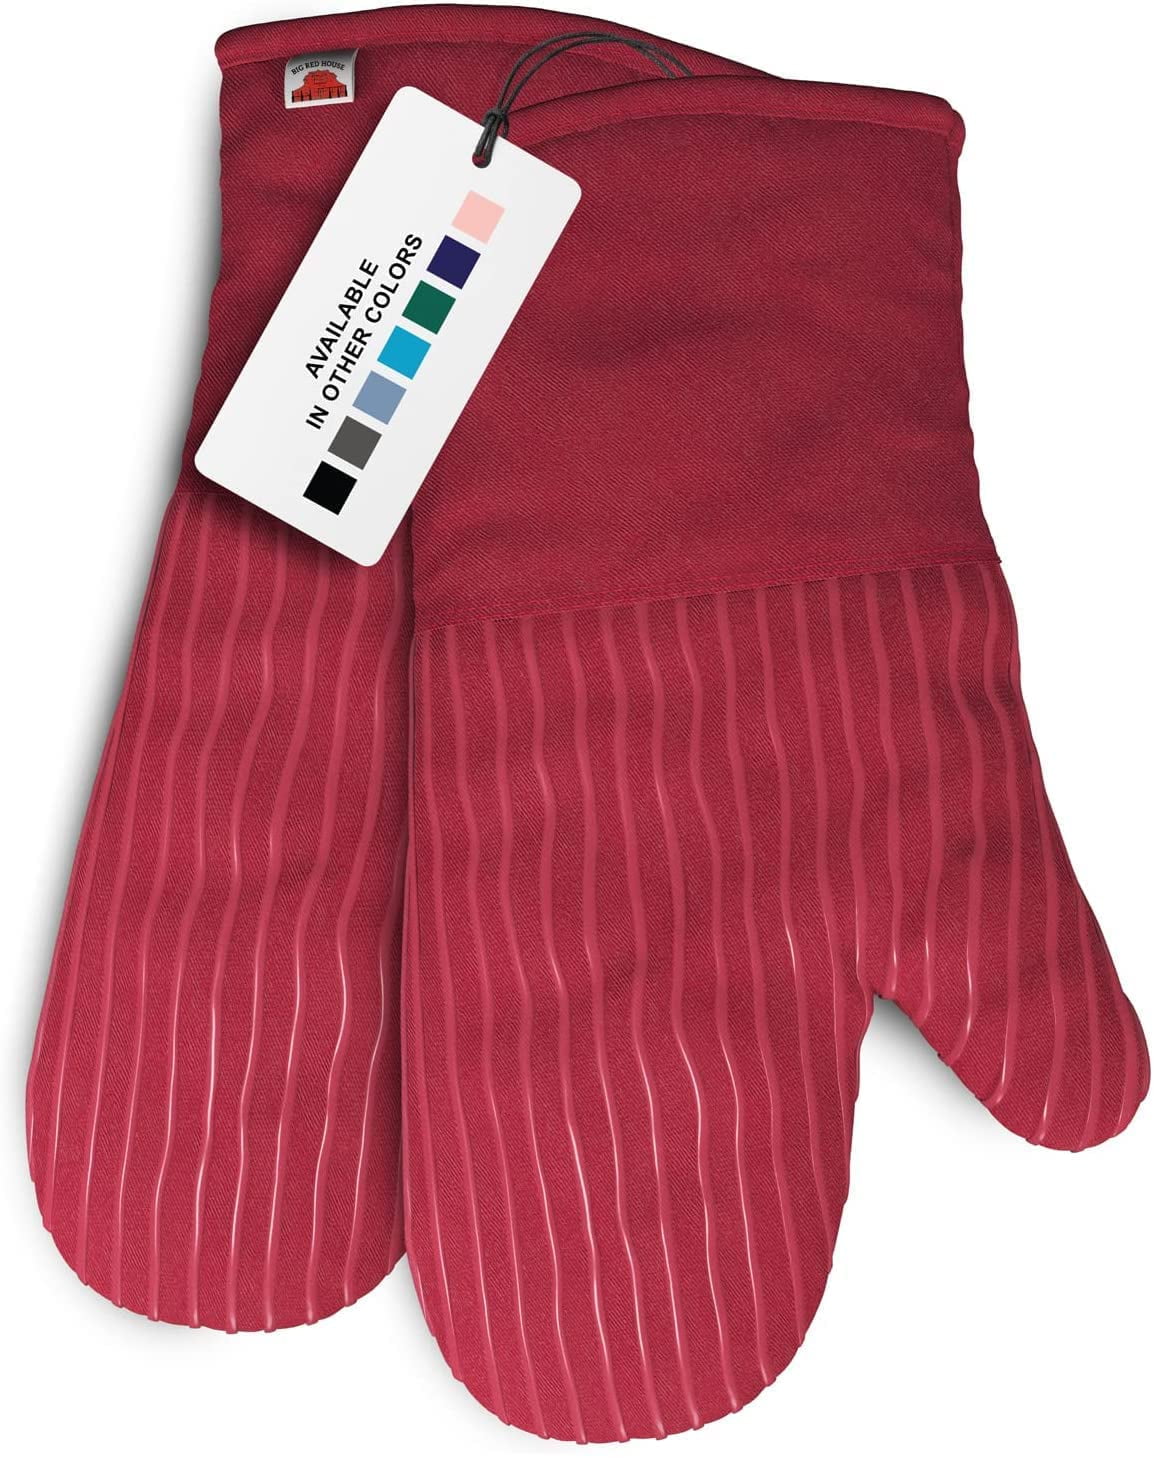 Klex 15inch Silicone Oven Mitts, Comfortable Fleece Quilted Cotton lining, Red, Set of 2